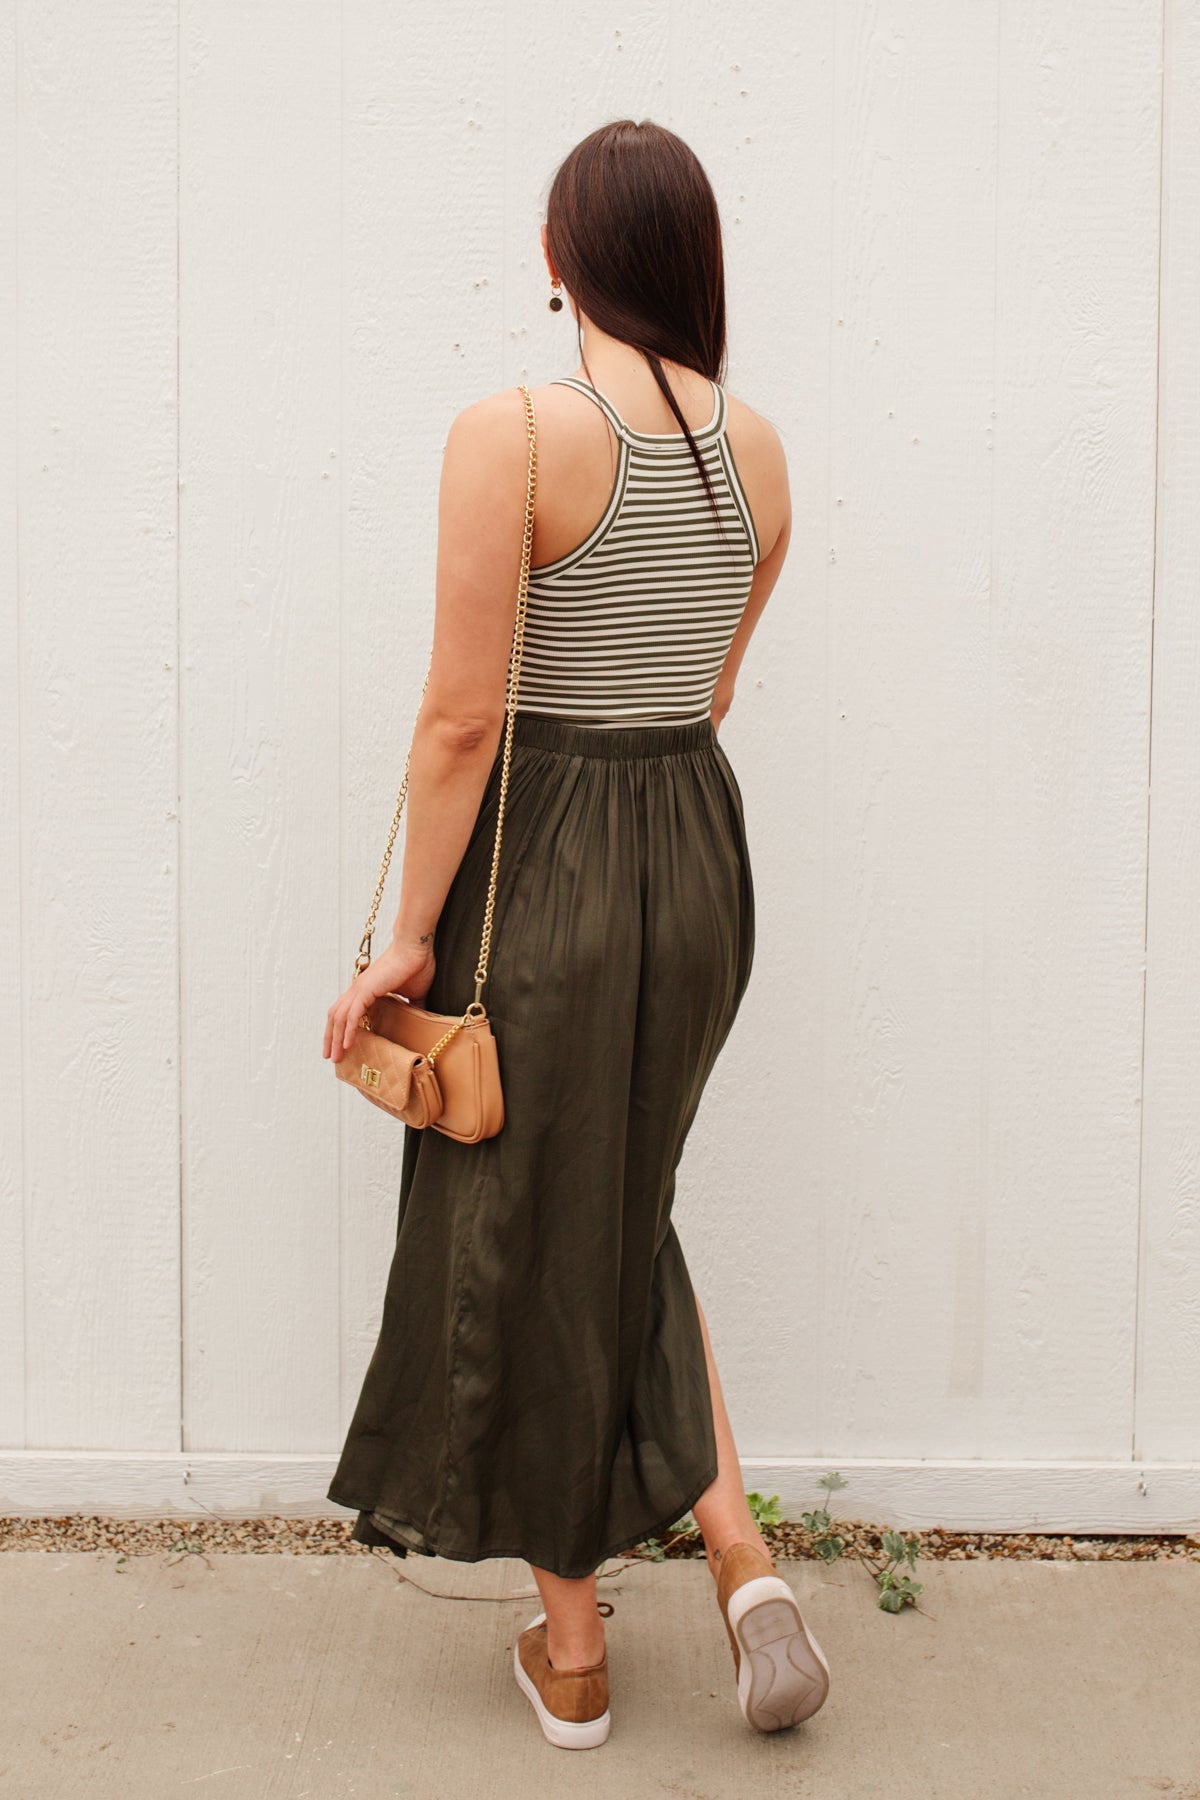 Get Away Skirt in Olive